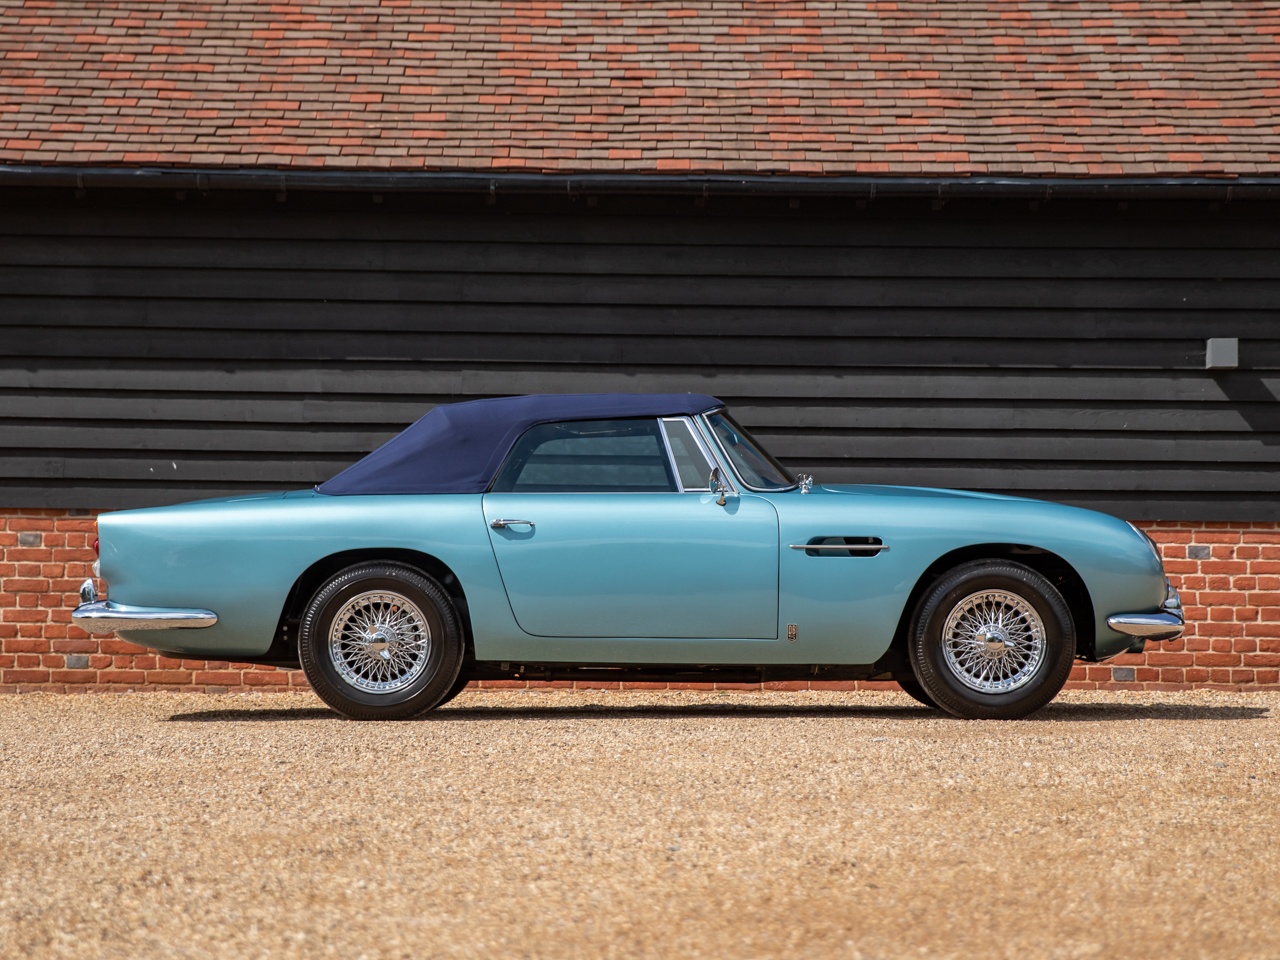 Aston Martin DB5 Convertible Owned  by ‘DB’ Himself Up for Sale